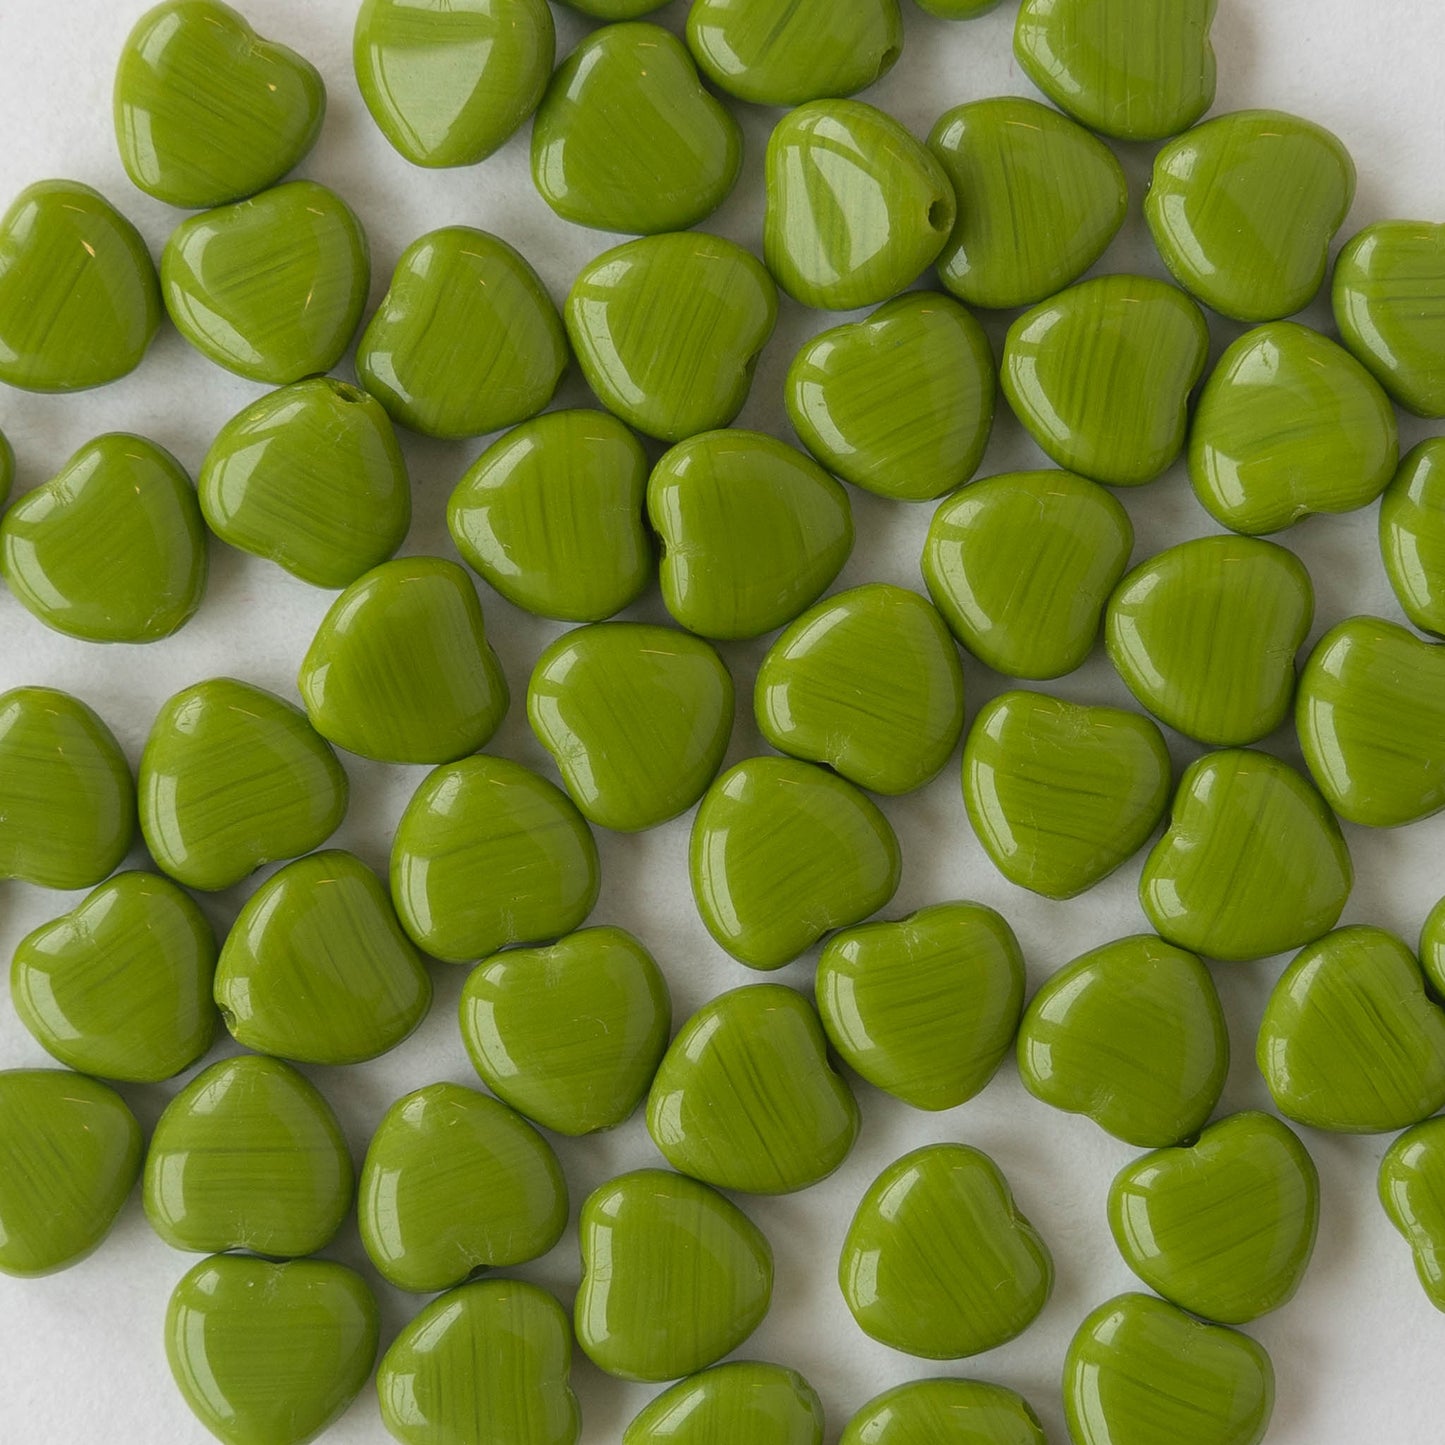 Load image into Gallery viewer, 8mm Heart Beads - Opaque Olive Green - 20 hearts
